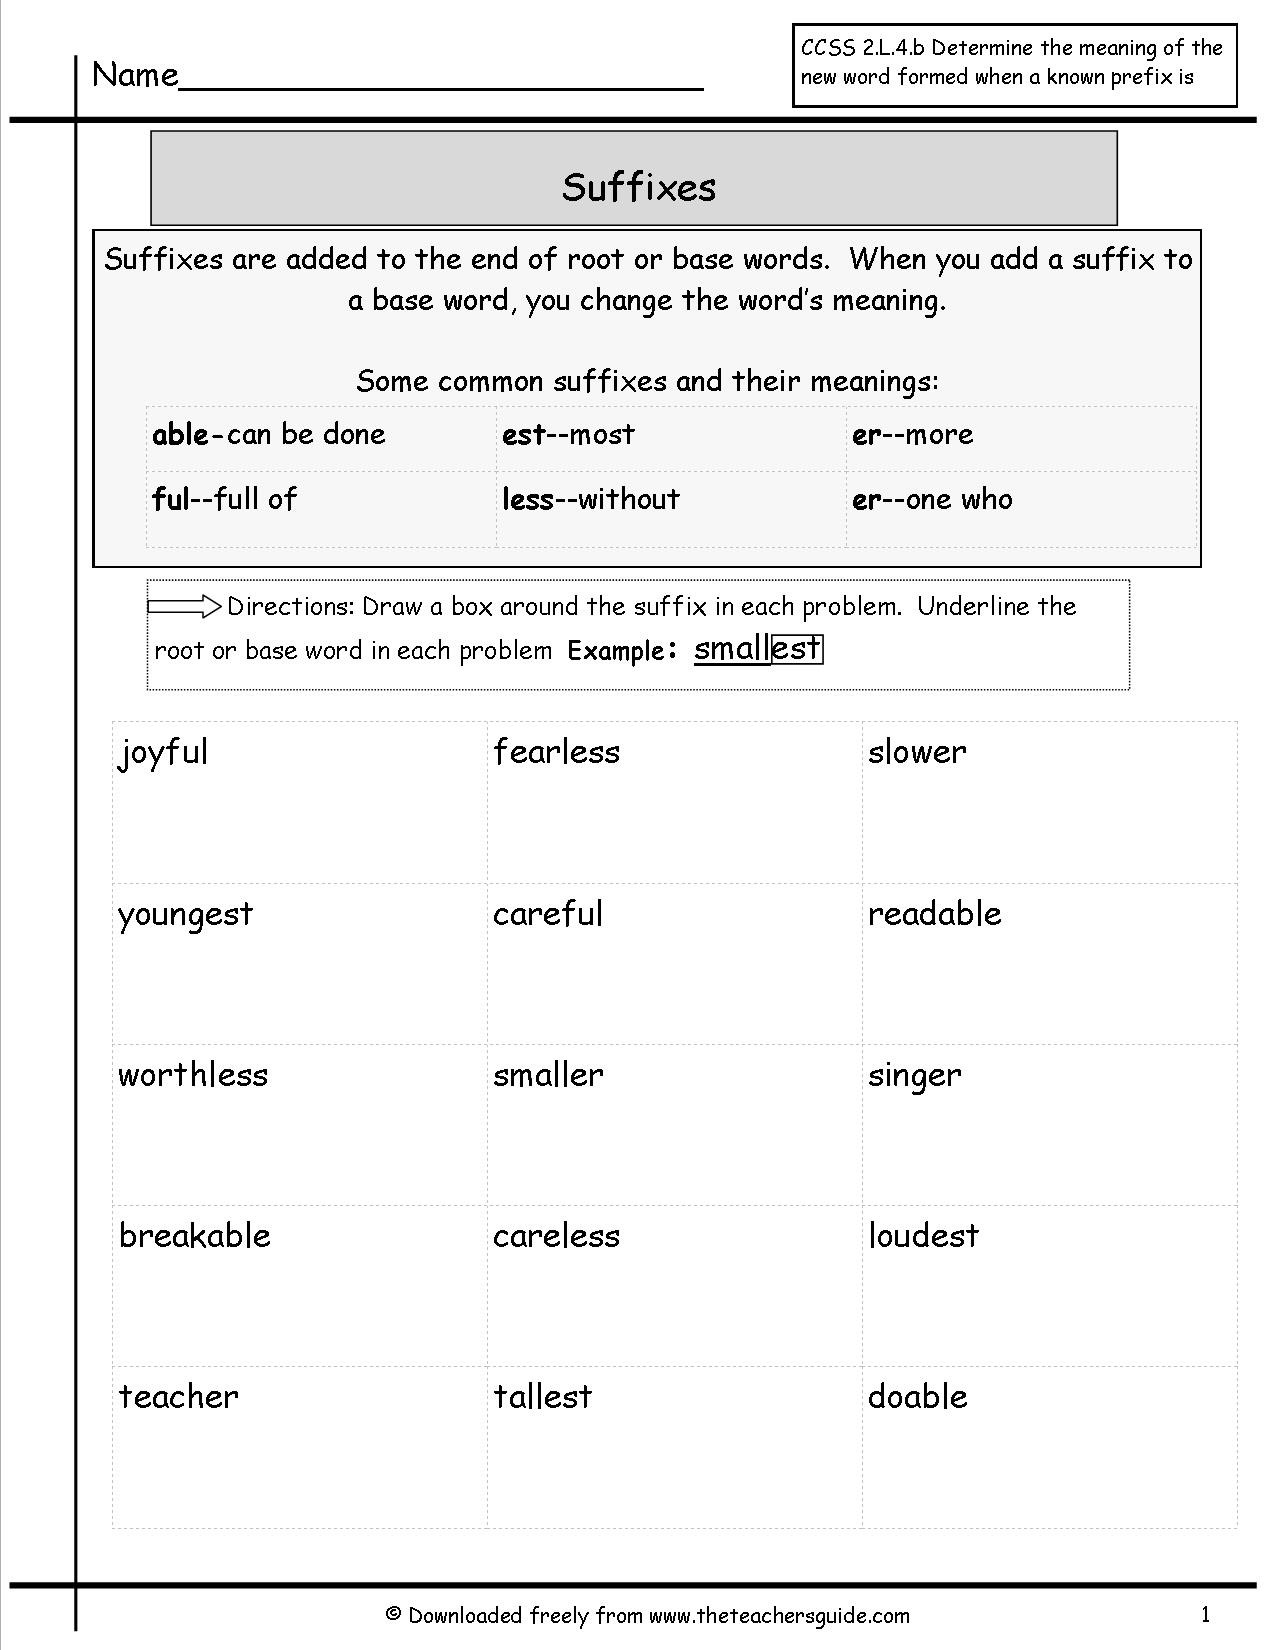 Prefixes Worksheets 4th Grade Free Prefixes and Suffixes Worksheets From the Teacher S Guide